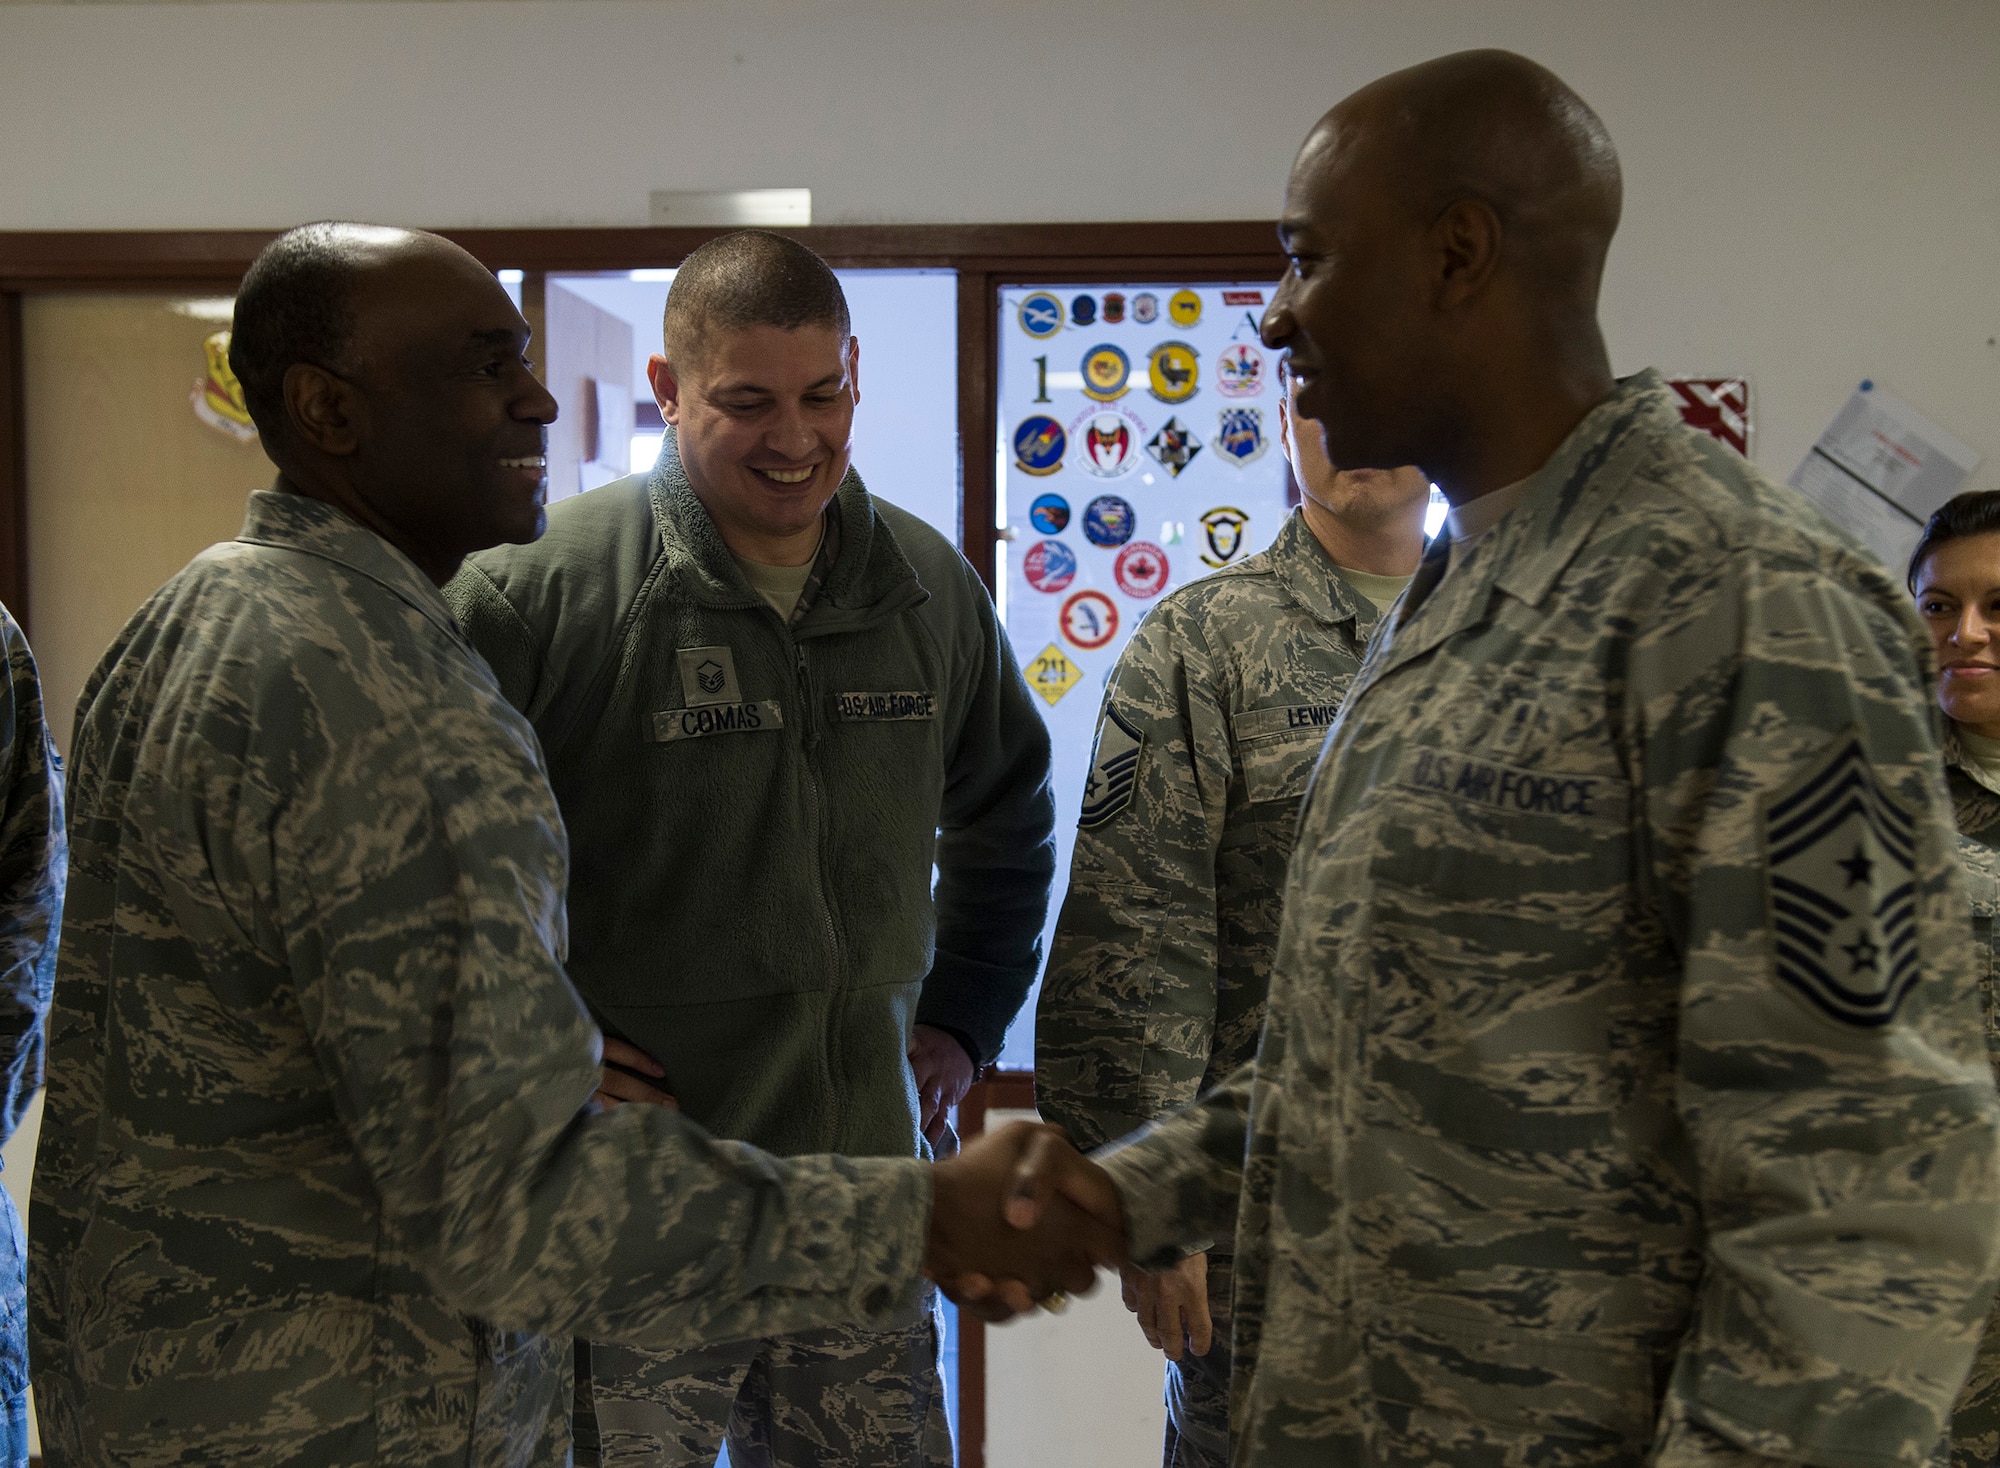 U.S. Air Force Chief Master Sgt. Kaleth Wright, 3rd Air Force command chief, greets U.S. Air Force Capt. Sean Ballard, 871st Air Expeditionary Squadron chaplain, at the Icelandic Air Surveillance and Policing maintenance center in Keflavik, Iceland, April 23, 2015. Wright and U.S. Air Force Lt. Gen. Darryl Roberson, 3rd AF commander, toured the facilities and spoke with Airmen regarding the IAS mission, an ongoing NATO commitment to maintain the security of Iceland’s airspace. (U.S. Air Force photo by Staff Sgt. Chad Warren/Released)